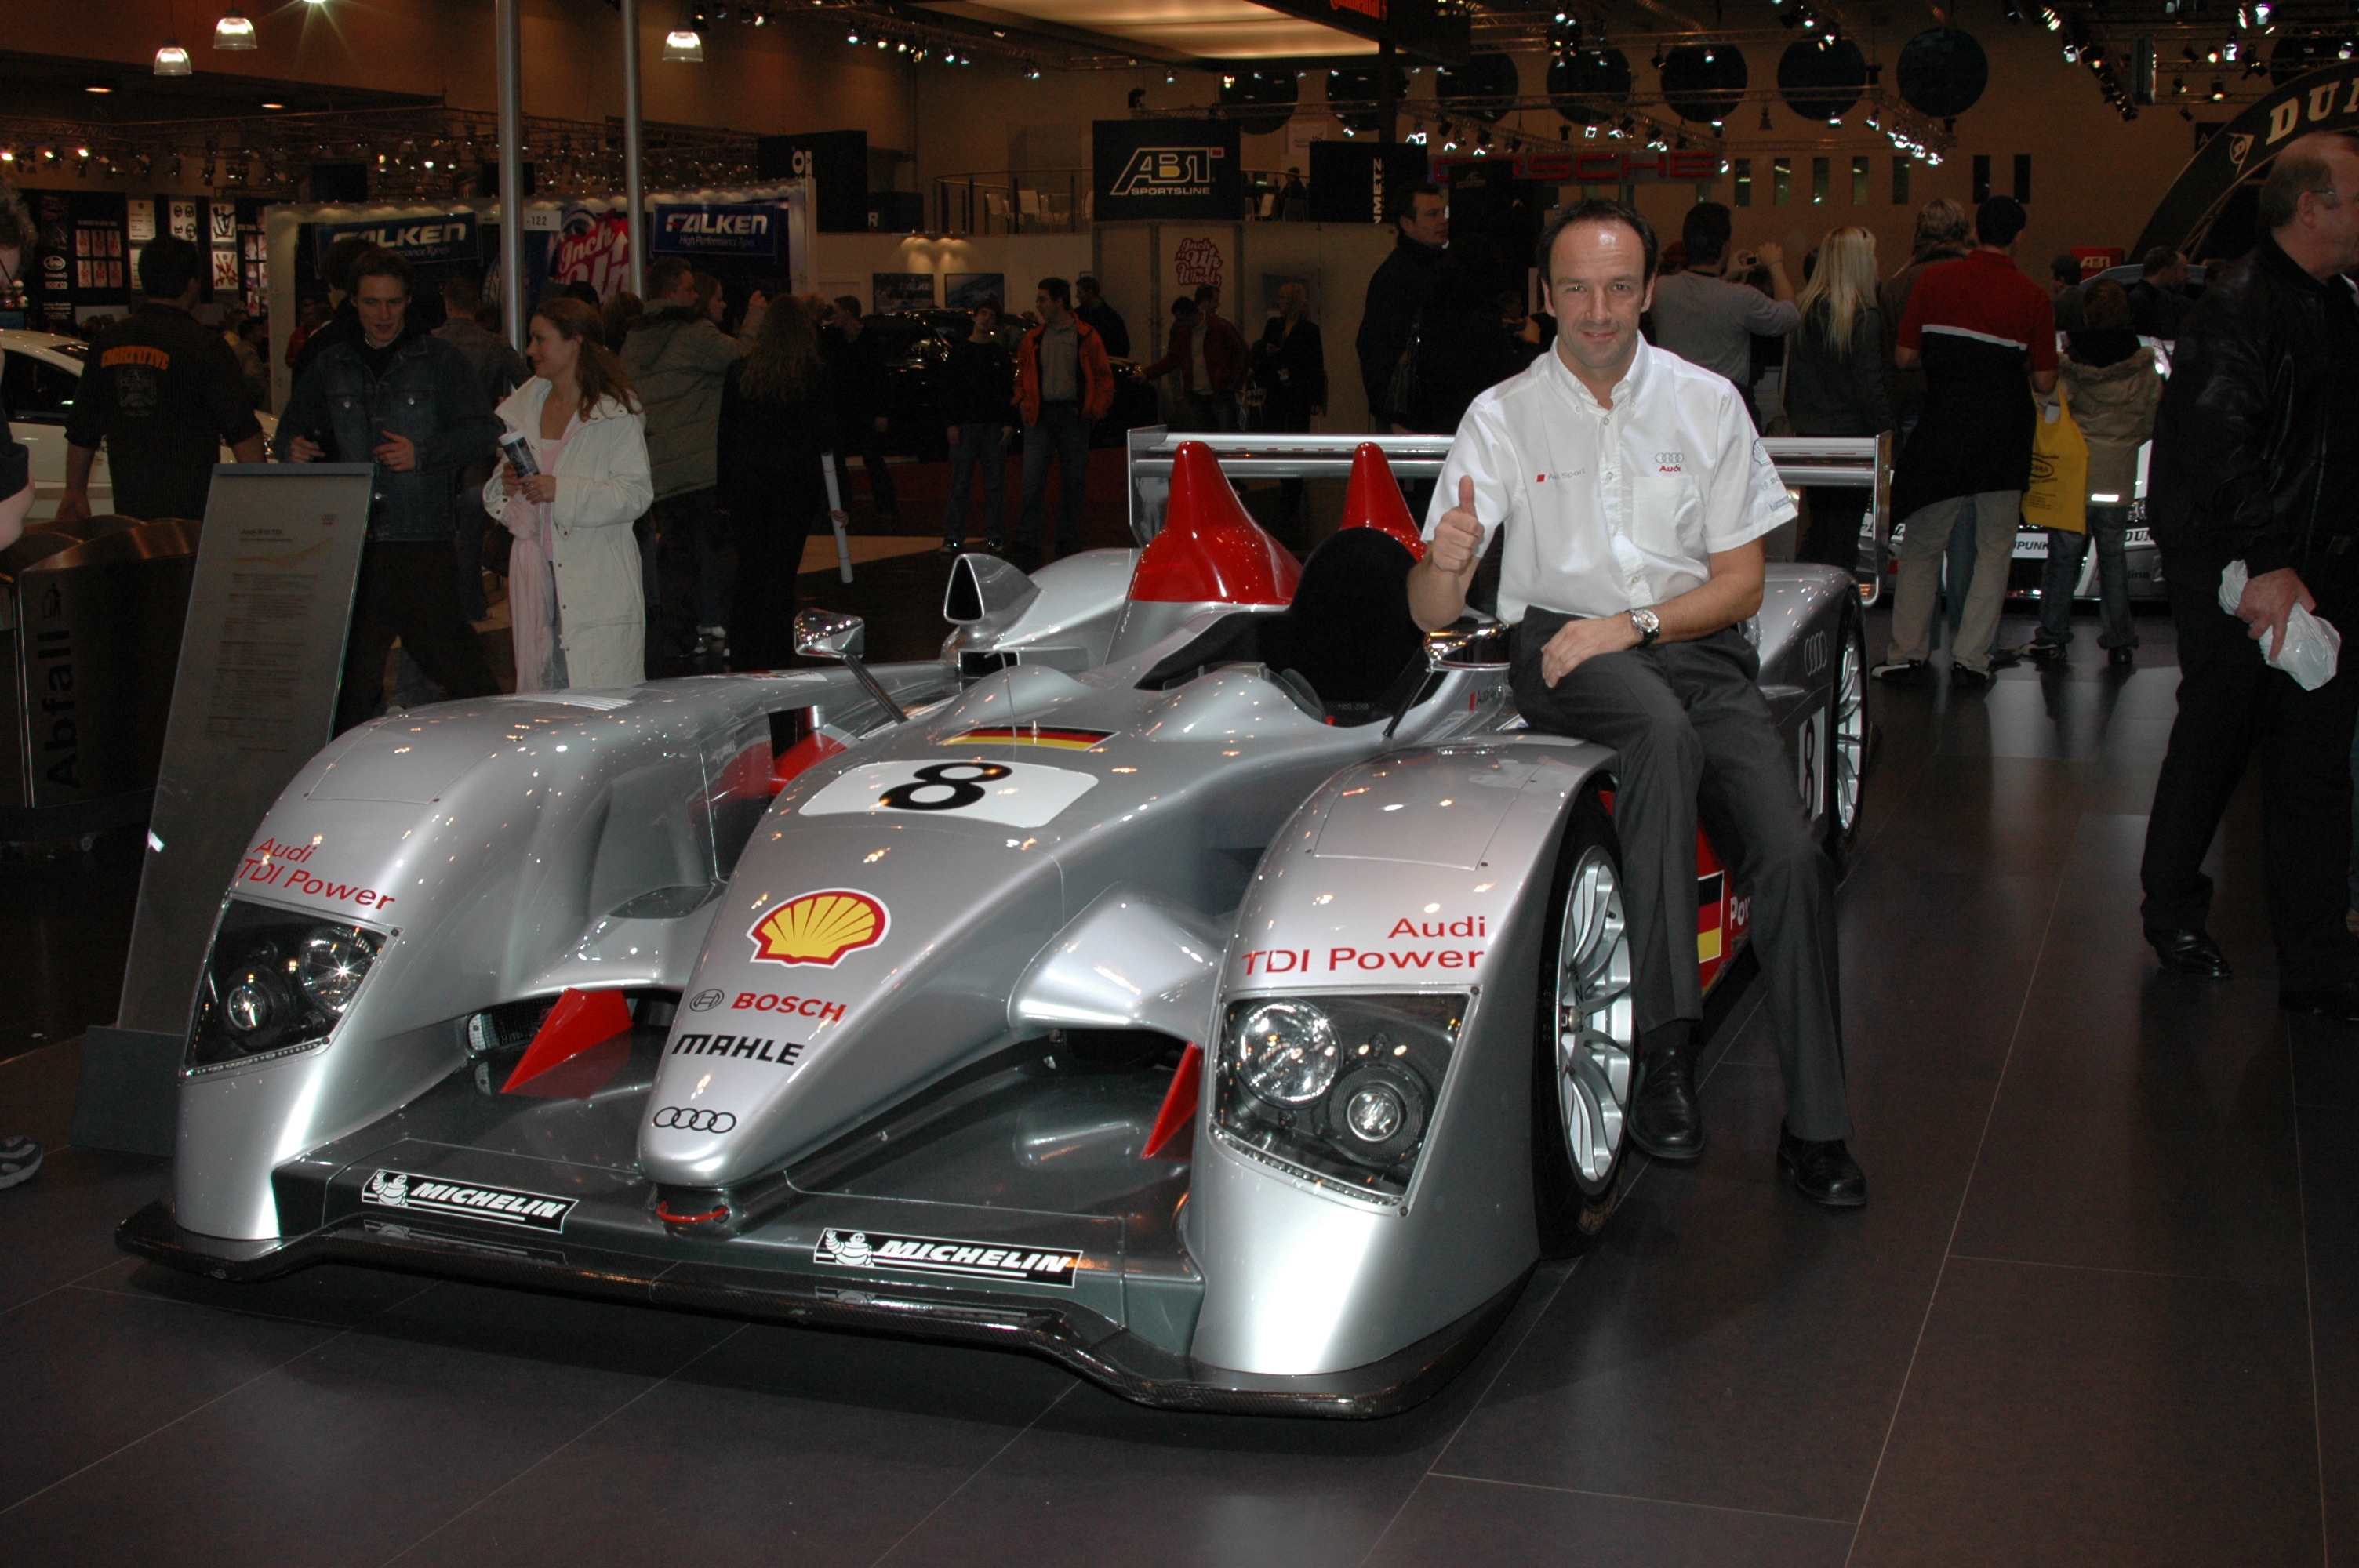 MARCO WERNER, Winner "LE MANS" 2005 and 2006